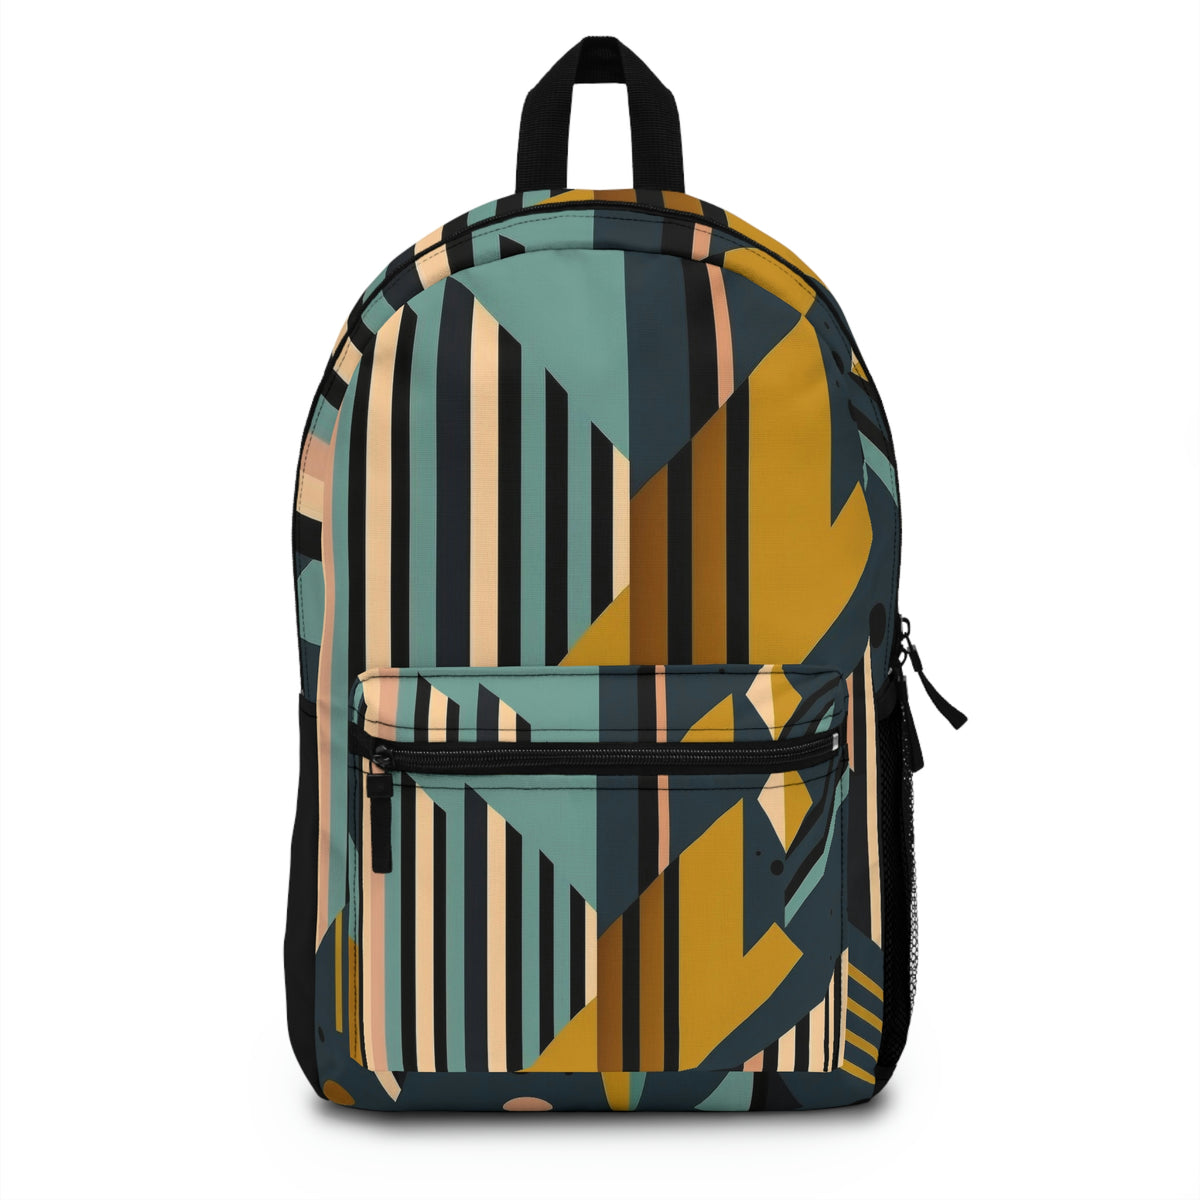 Lined Chaos Backpack - pattern only